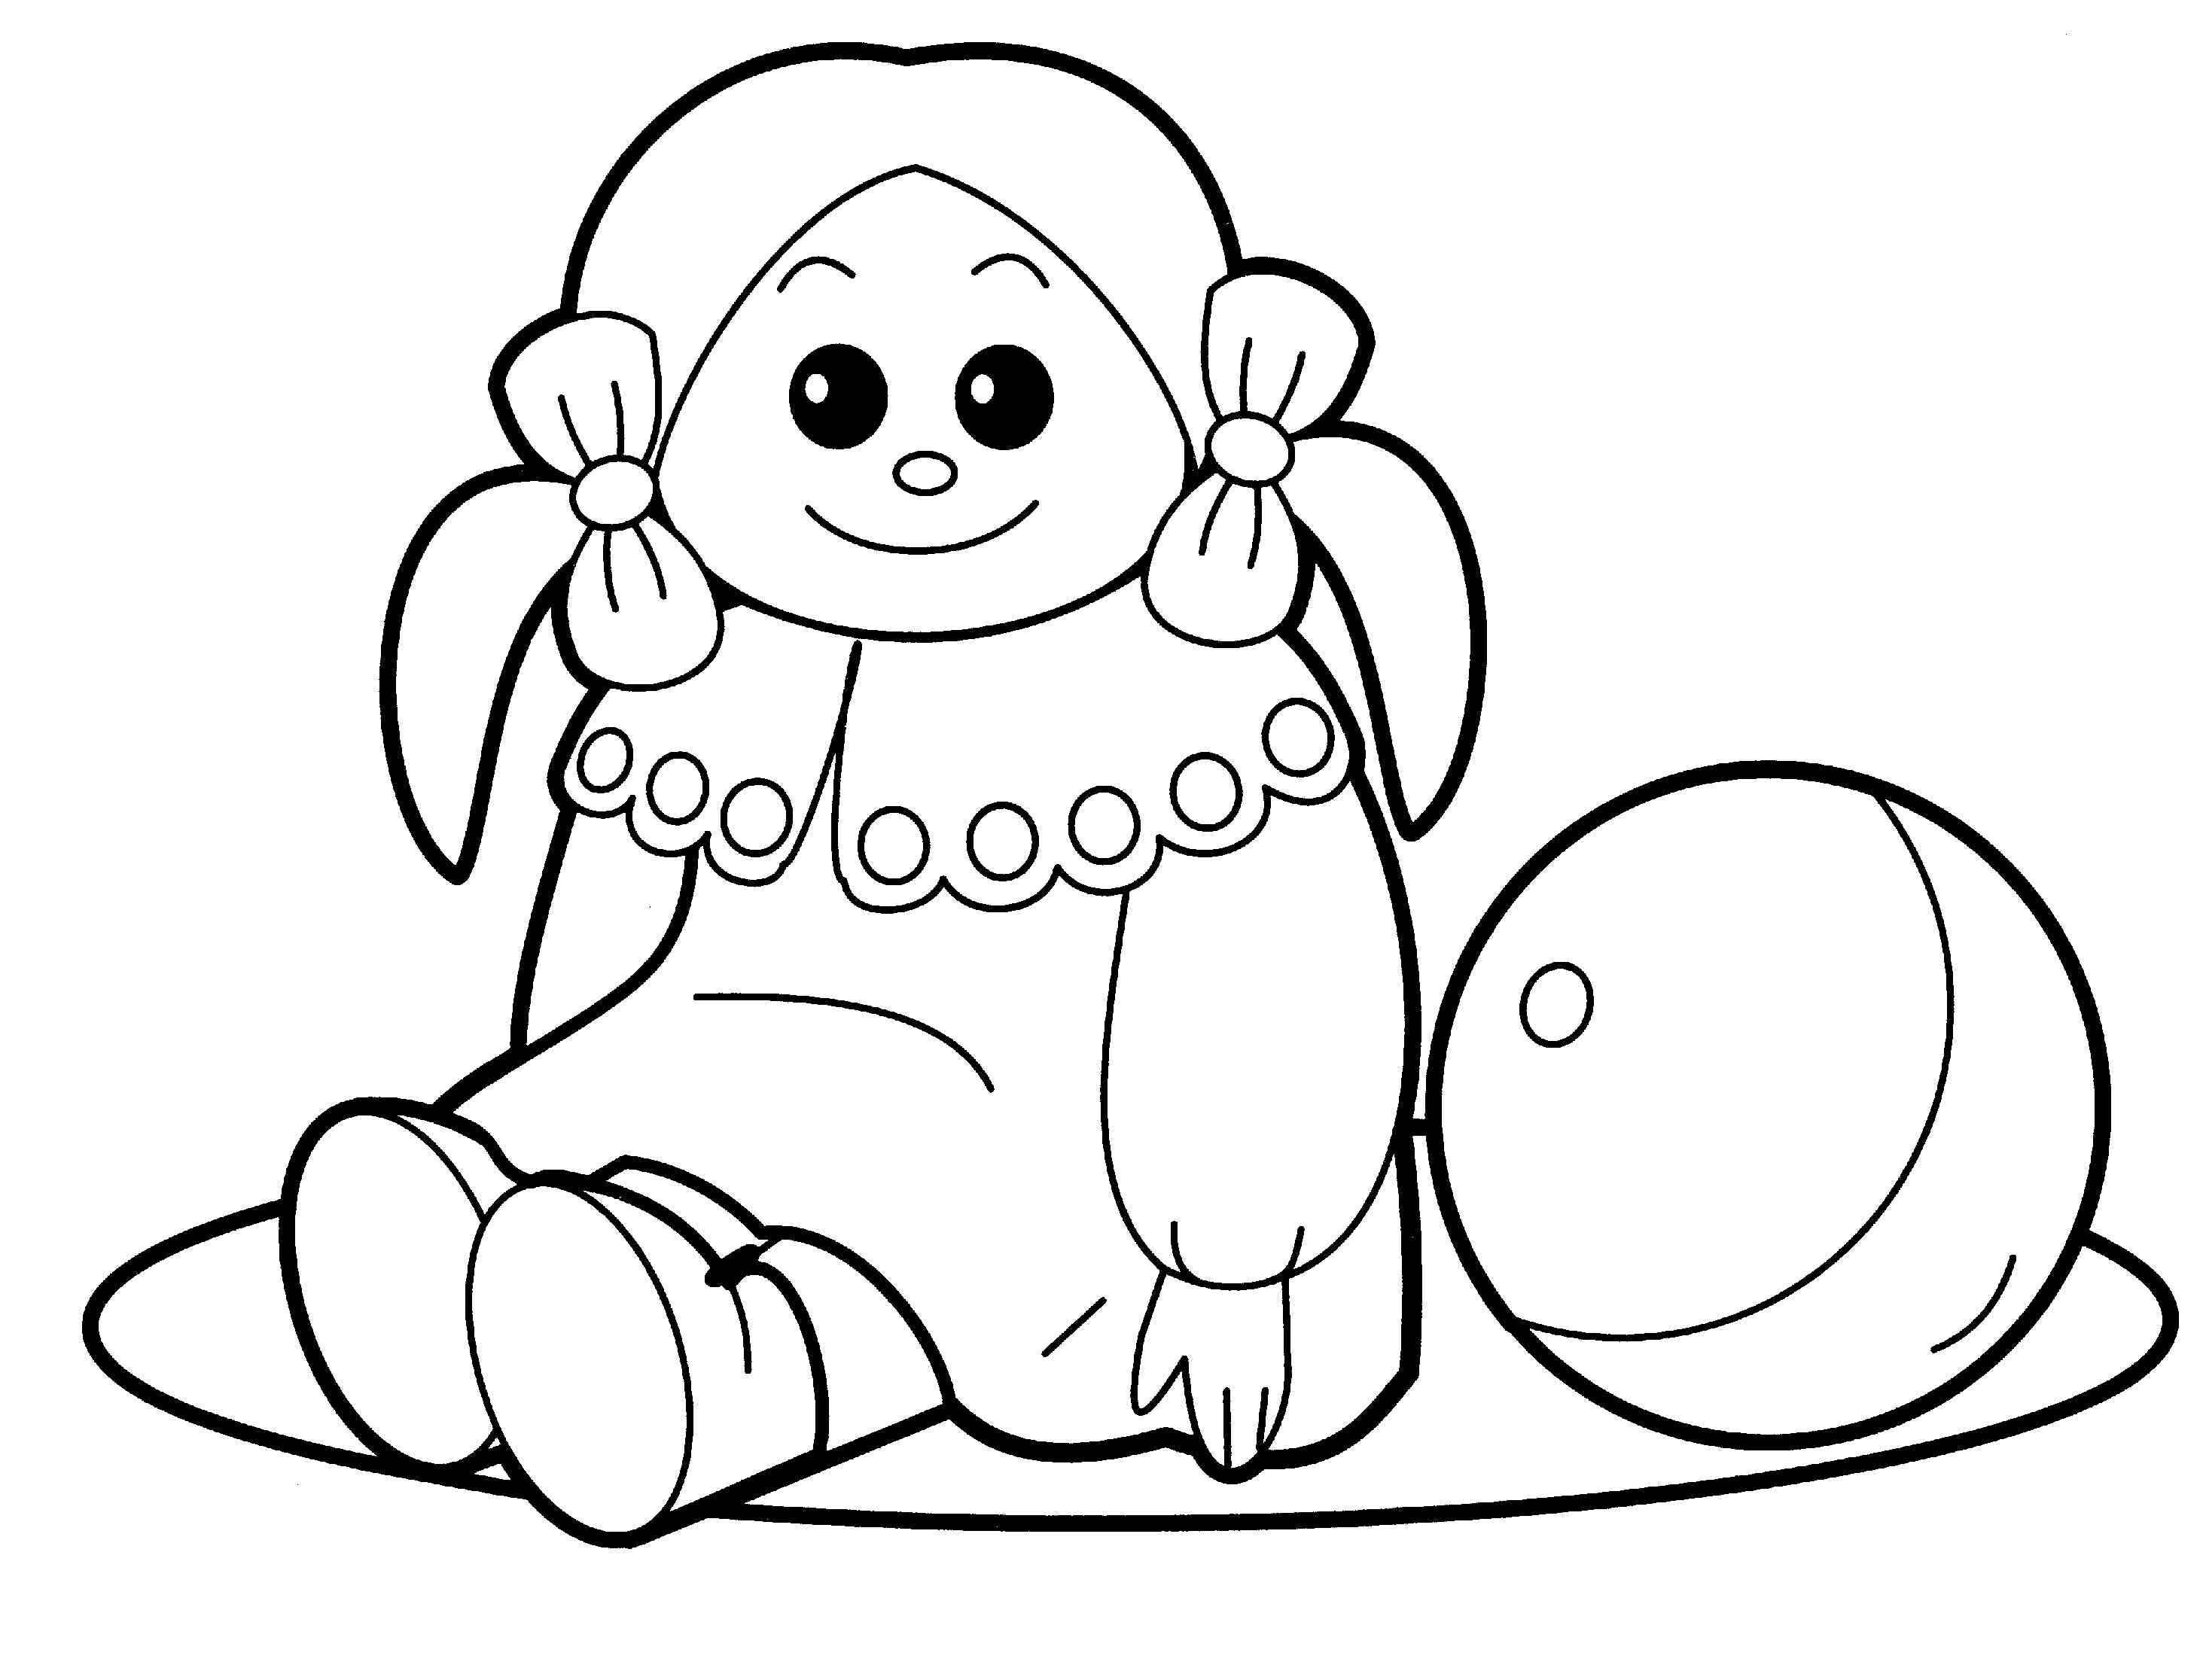 Download Toys Coloring Pages - Best Coloring Pages For Kids